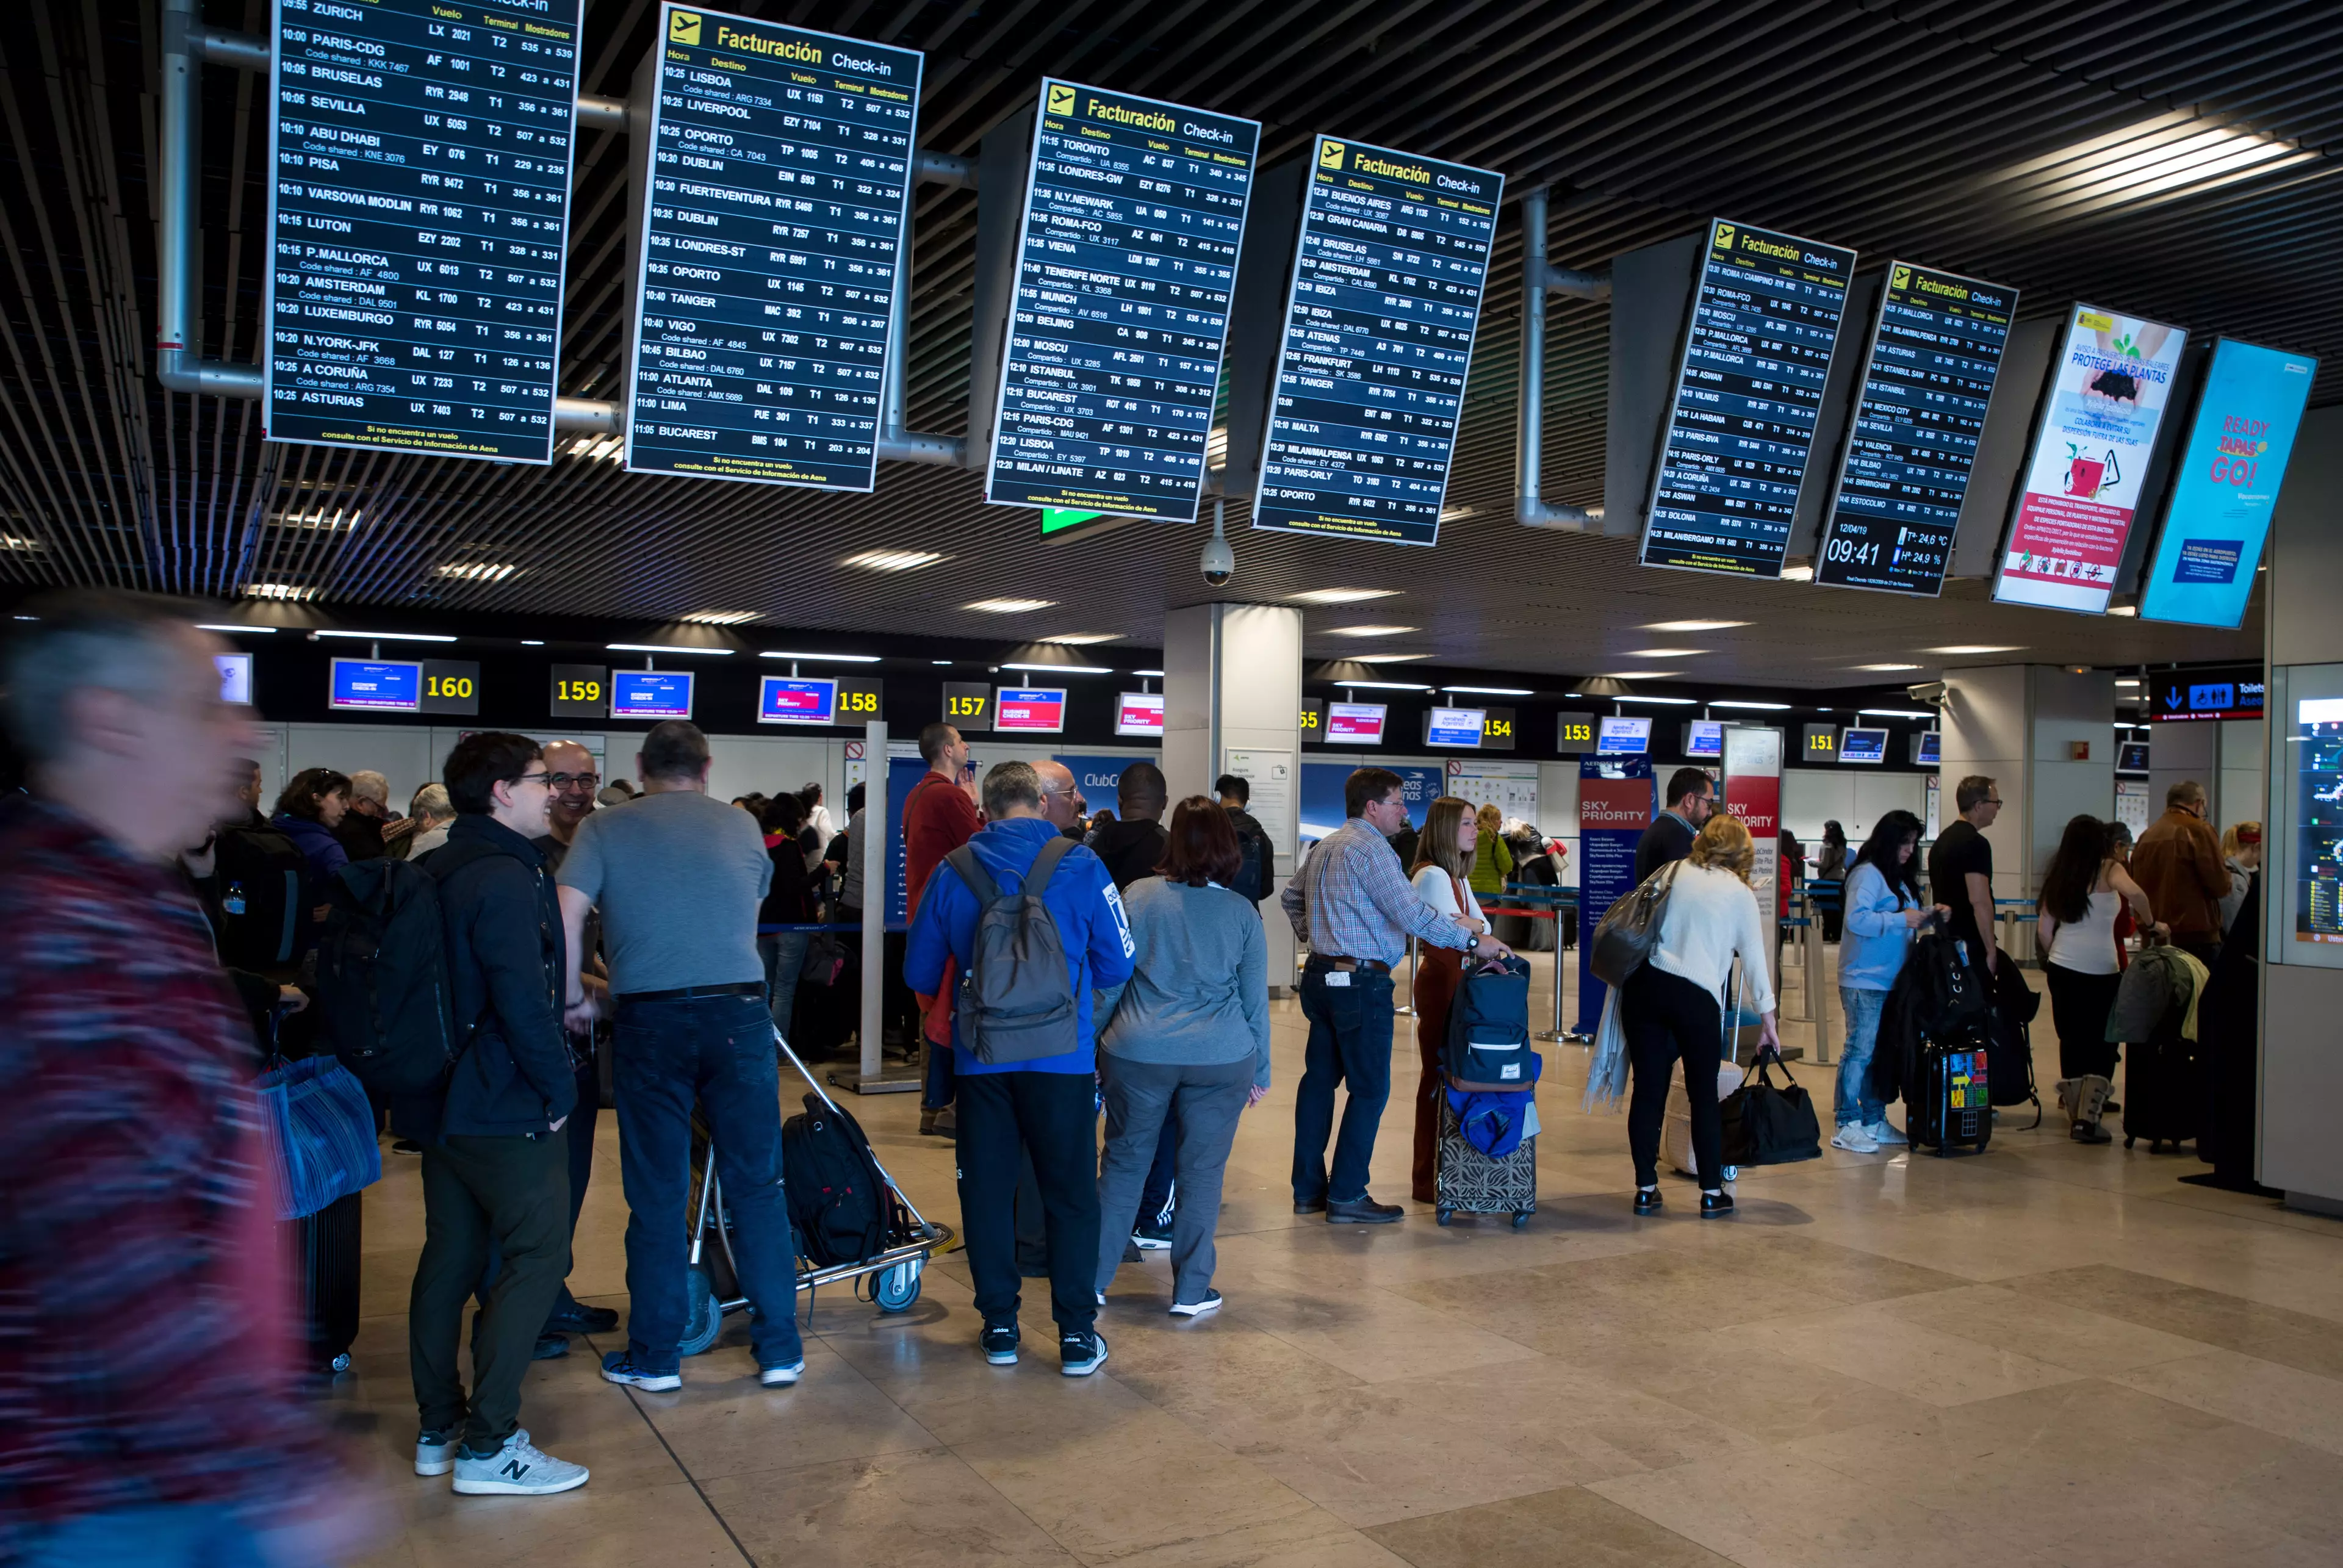 Queues are to be expected over the weekend at Spanish airports.